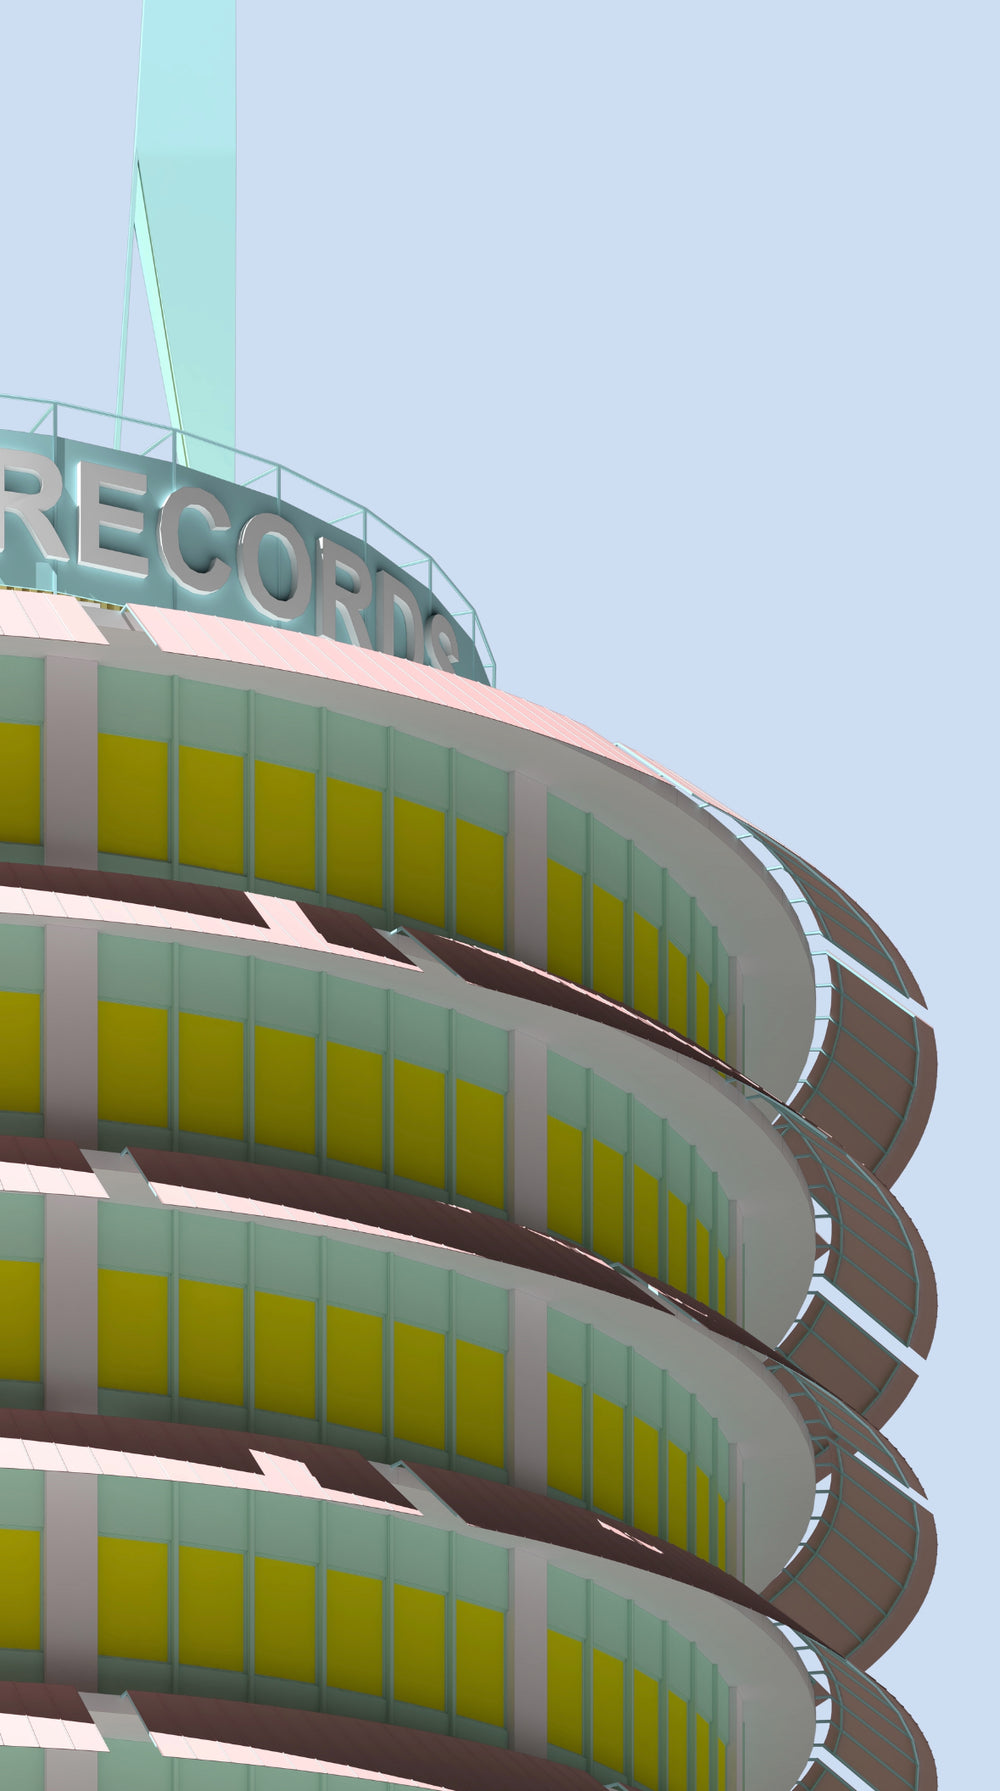 Capitol Records Building Posters